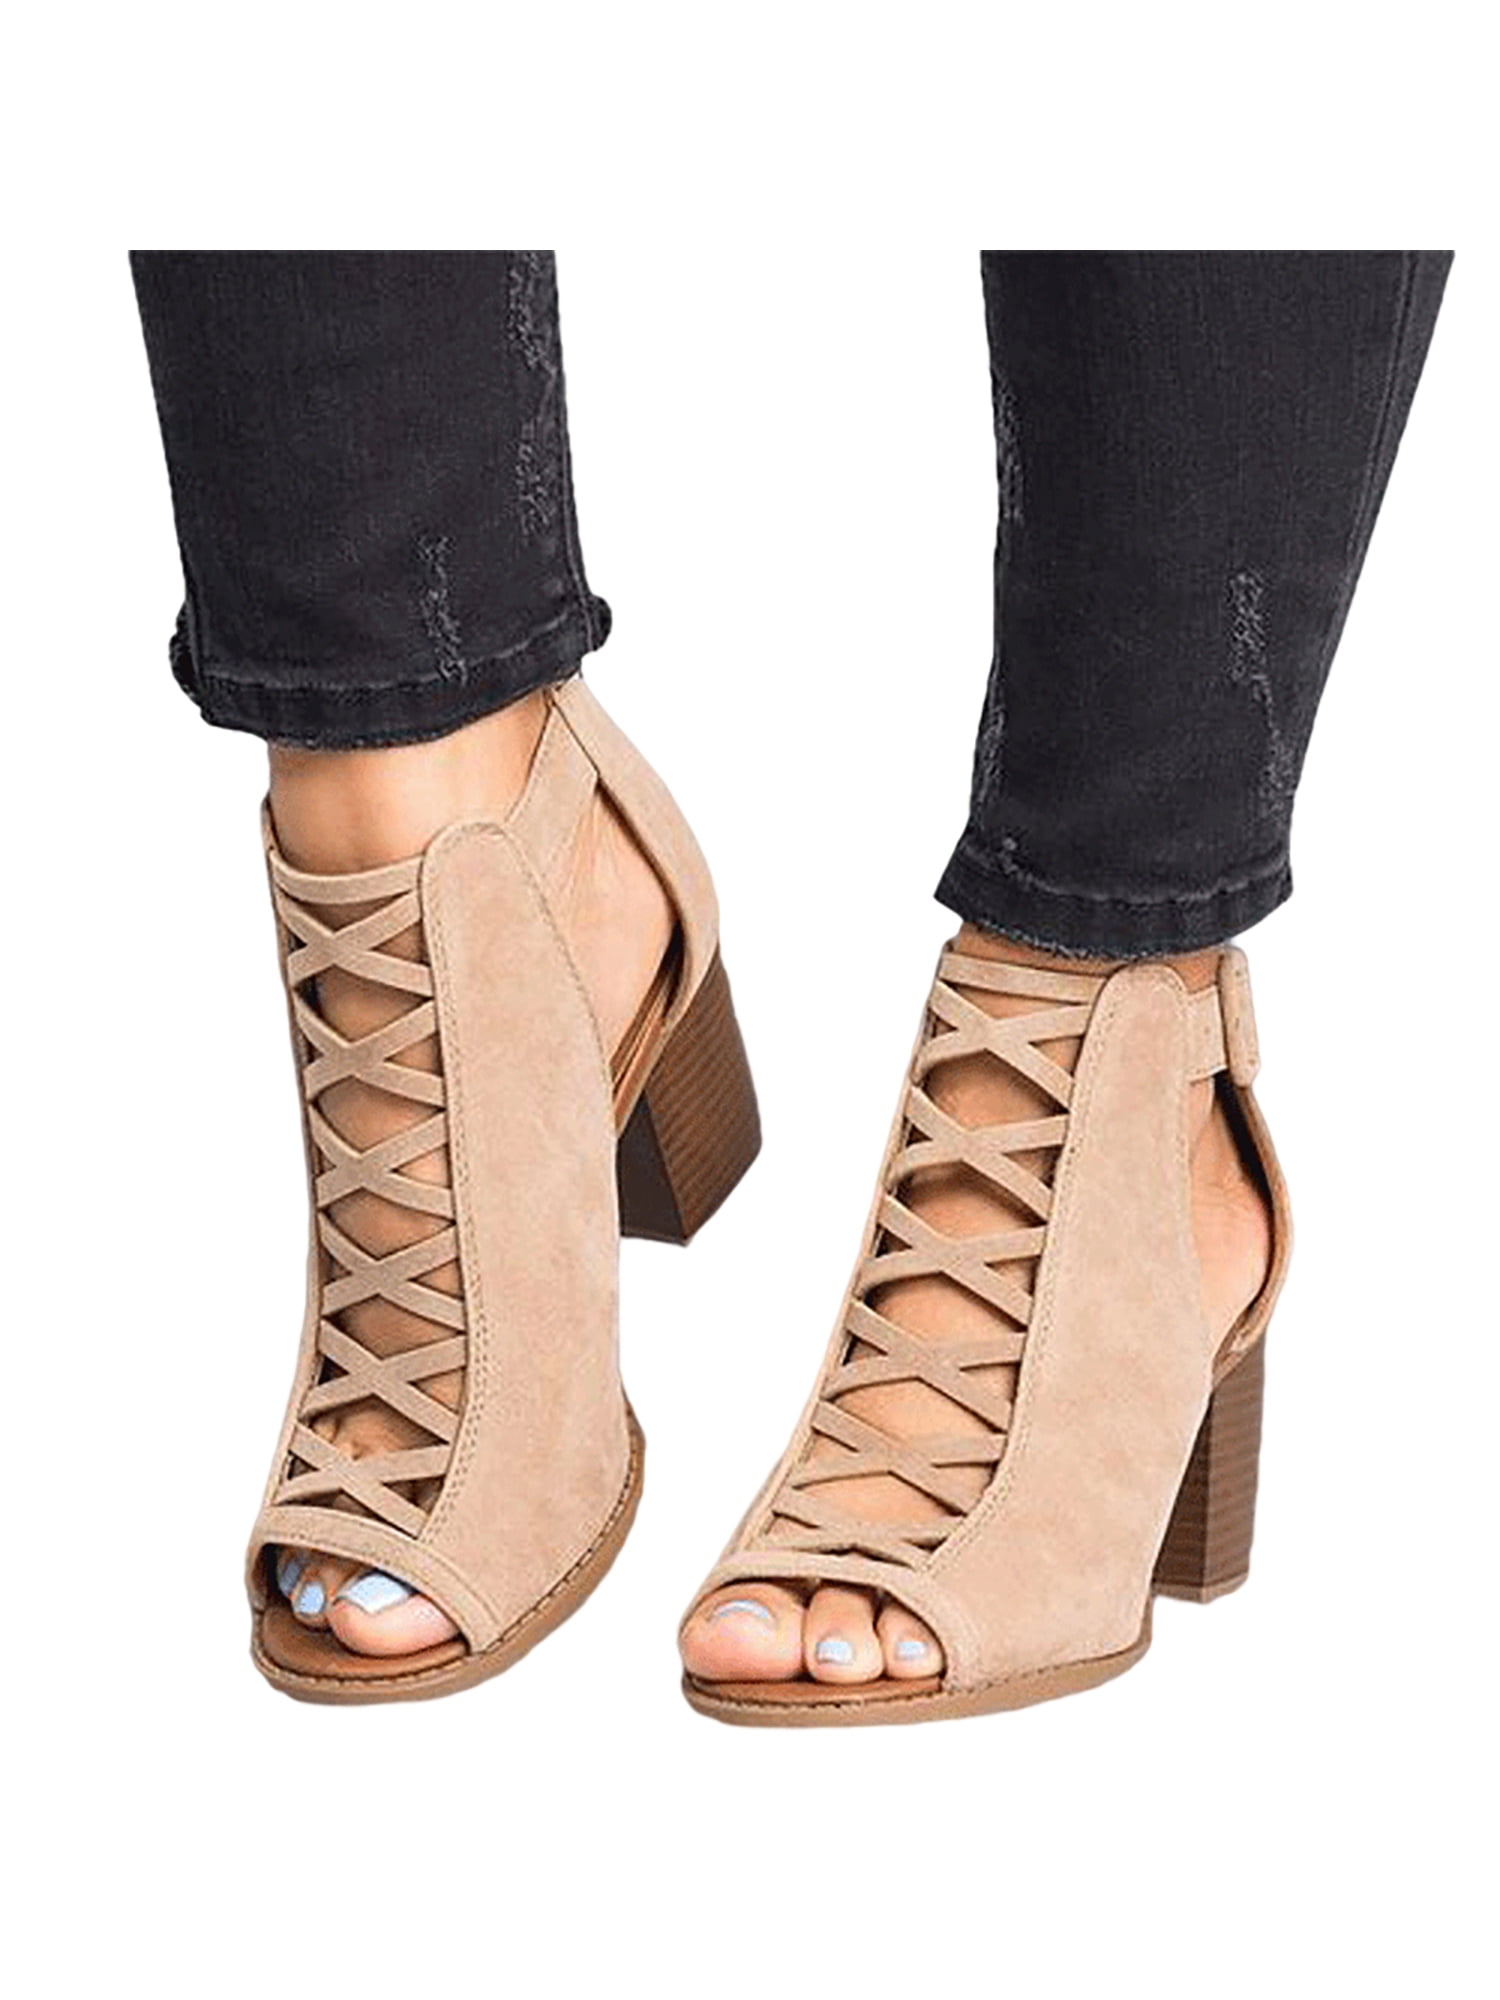 Womens Hollow Out Summer Ankle Boots Open Toe Block Mid Heel Sandal Zipper Shoes 